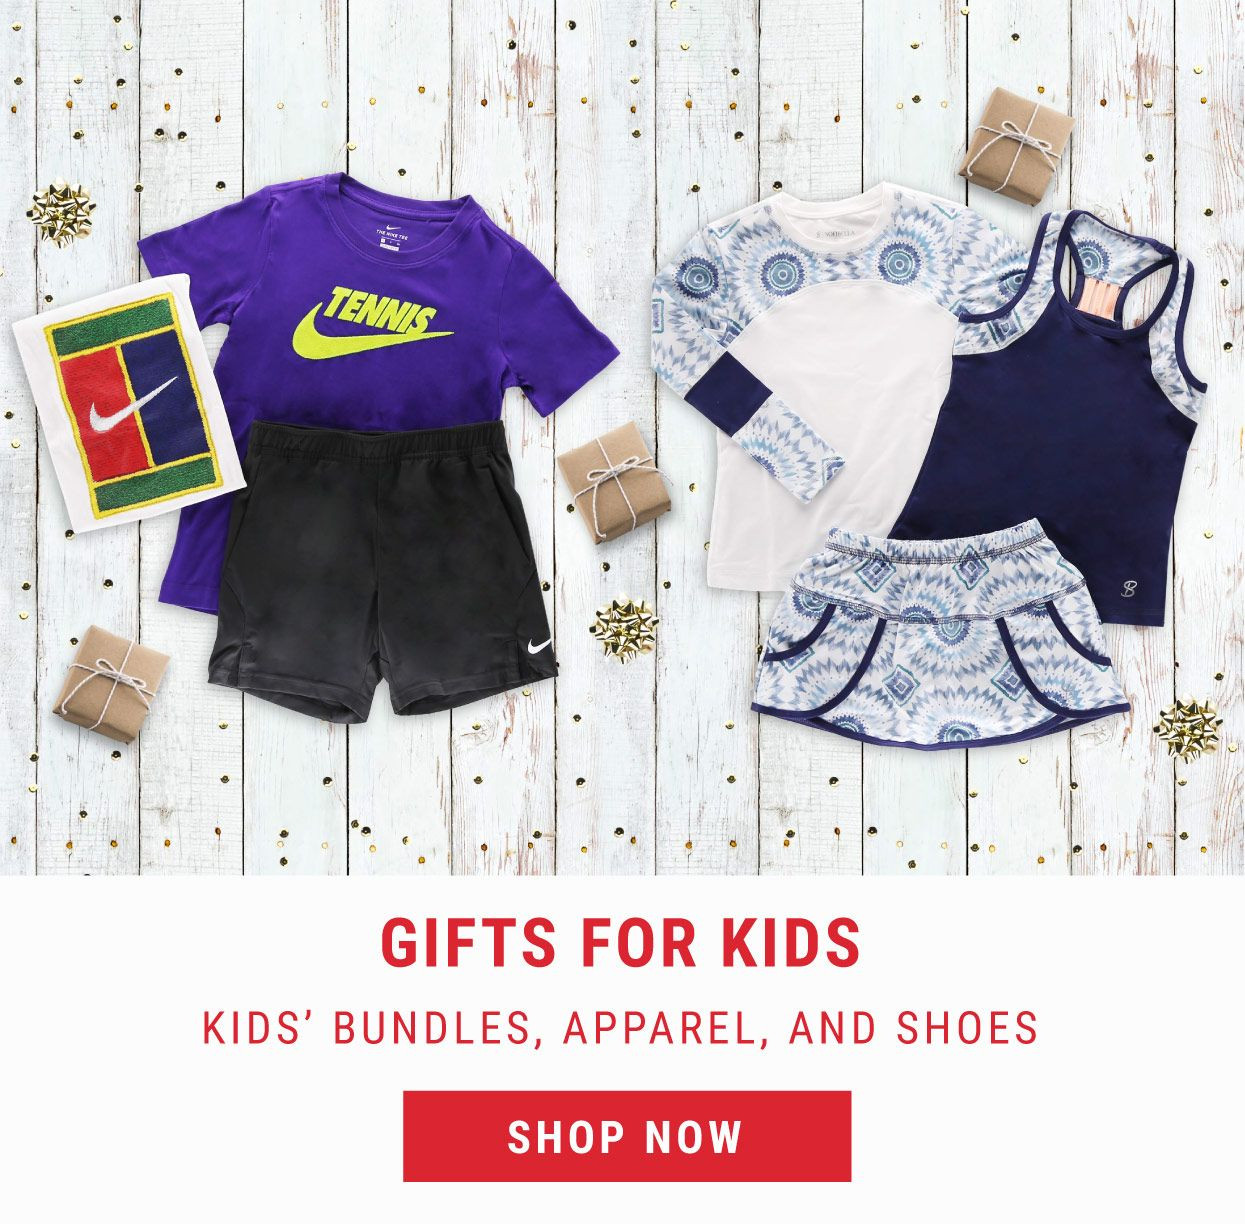 Tennis Gifts For Kids
 We have everything you need to find the perfect tennis